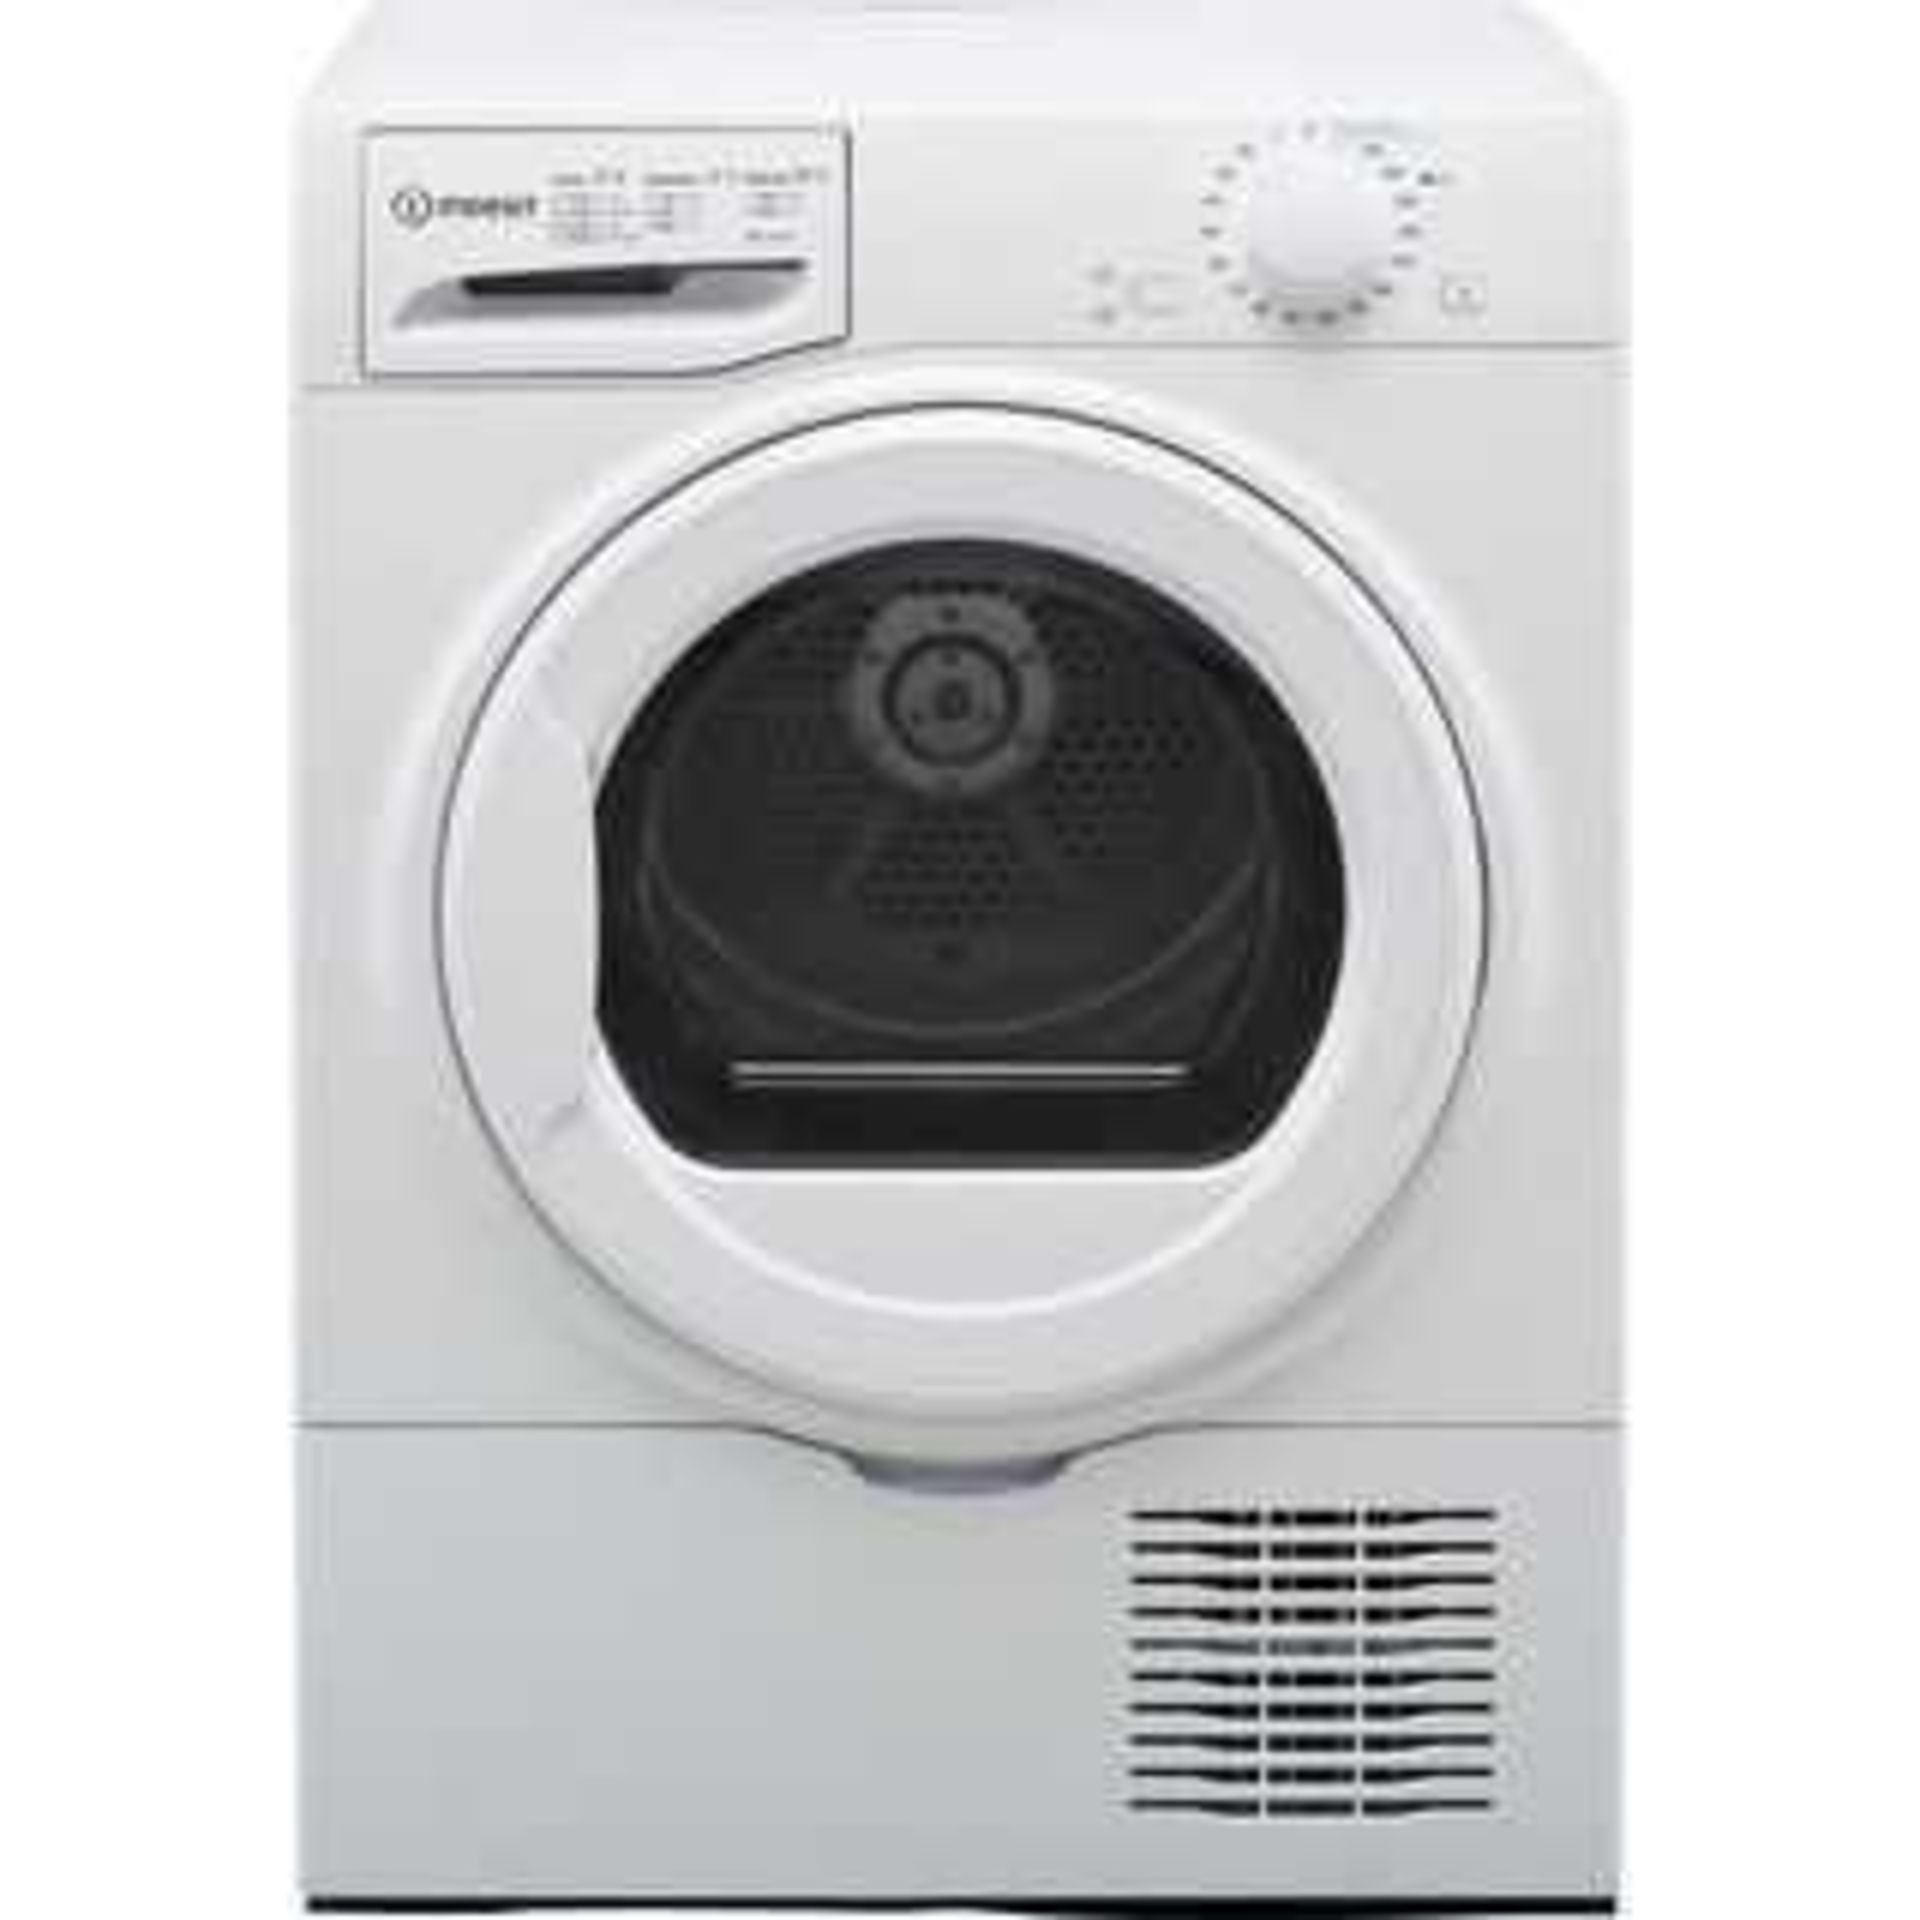 (Sp) RRP £250 Lot To Contain 1 Indesit I2D81Wuk 8Kg Condenser Tumble Dryer - White